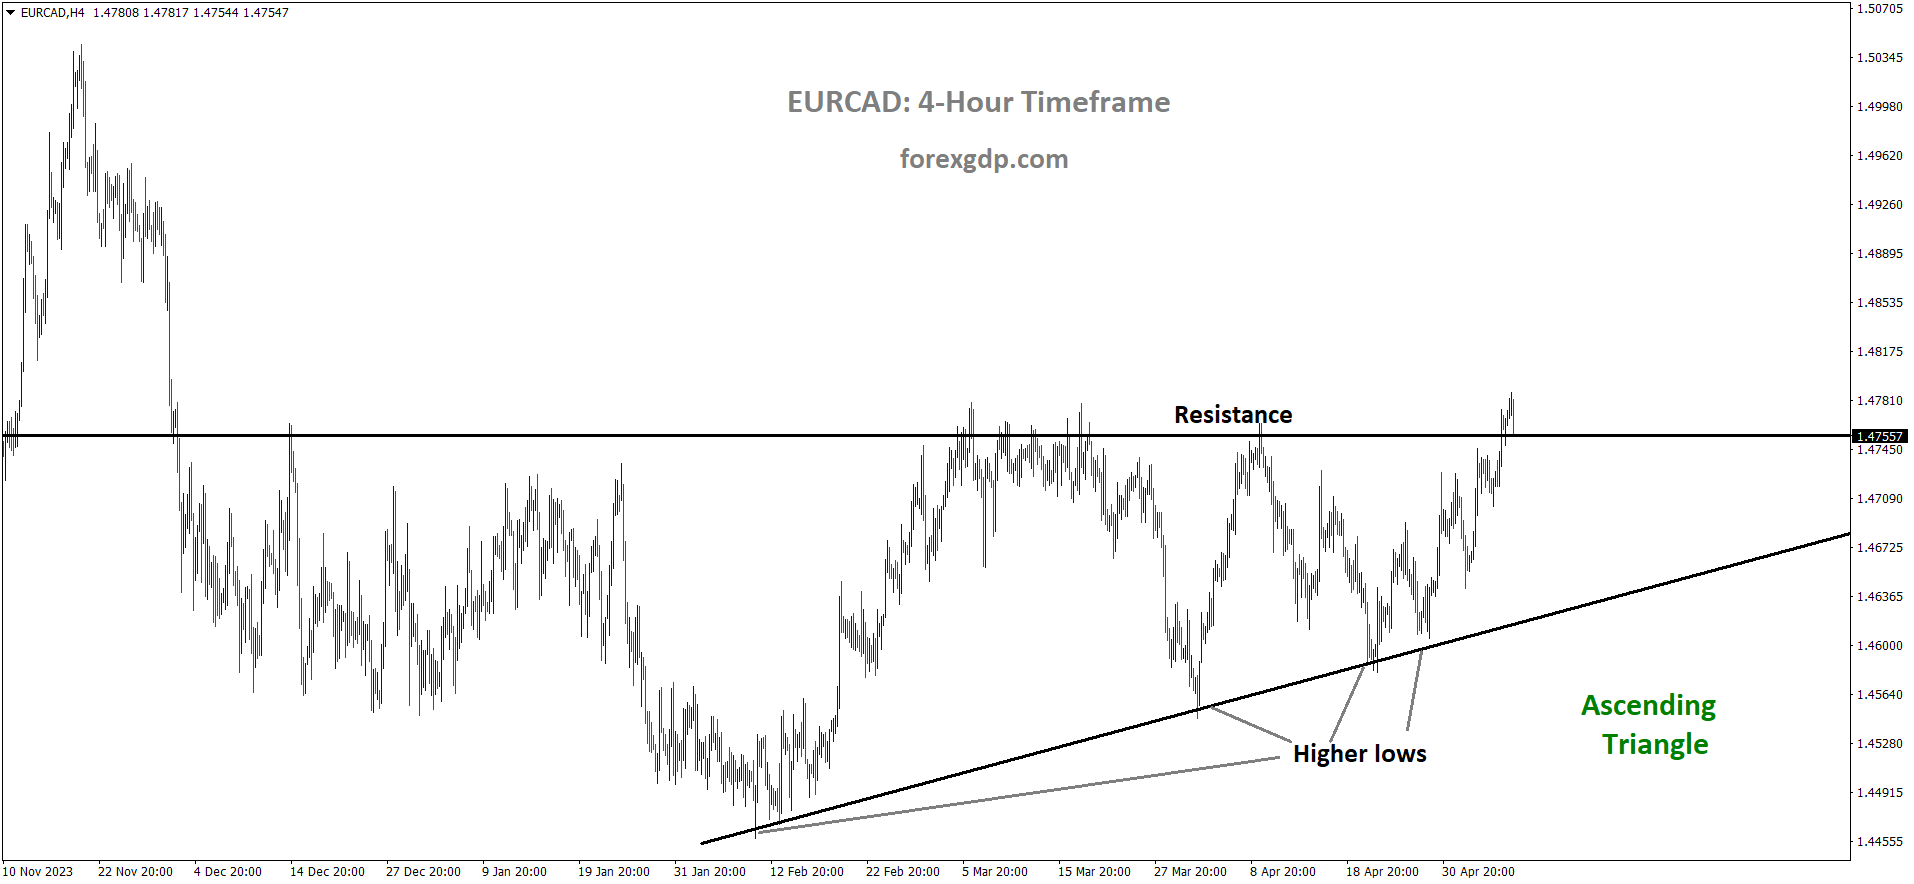 EURCAD is moving in Ascending Triangle and market has reached resistance area of the pattern